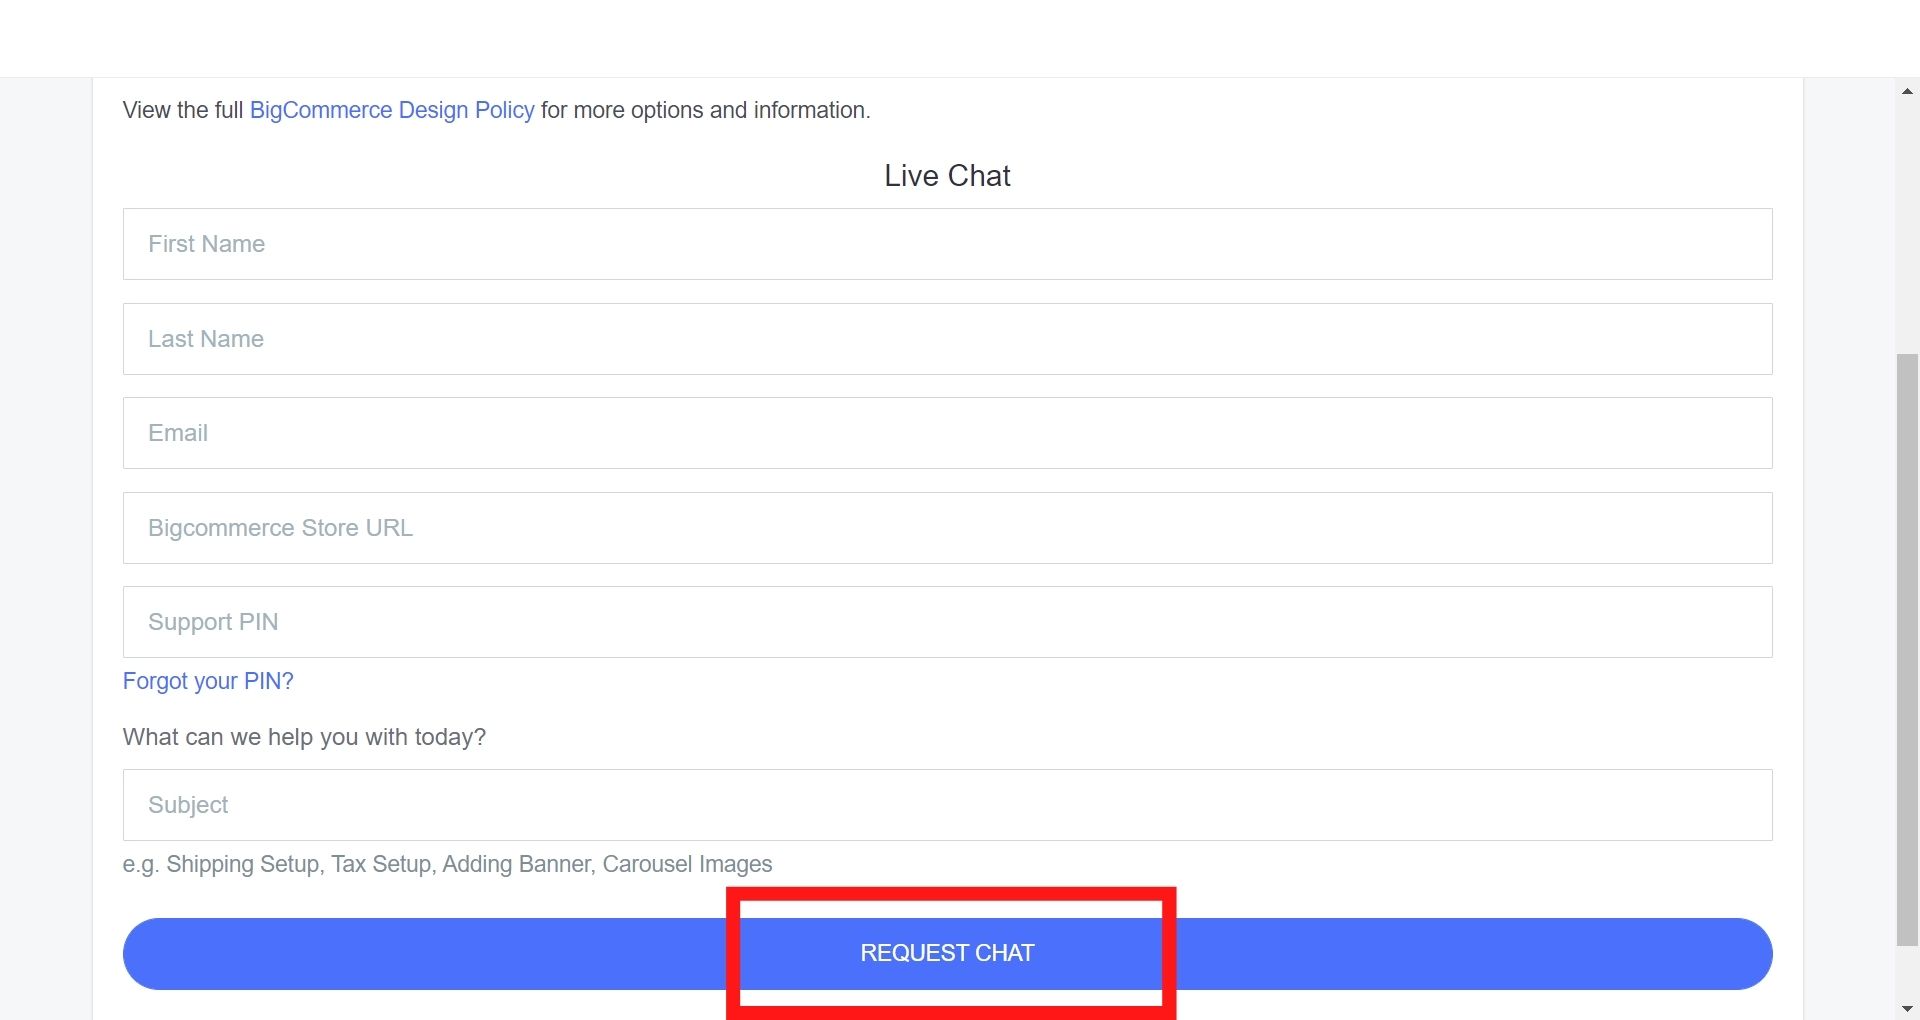 Contacting BigCommerce through live chat